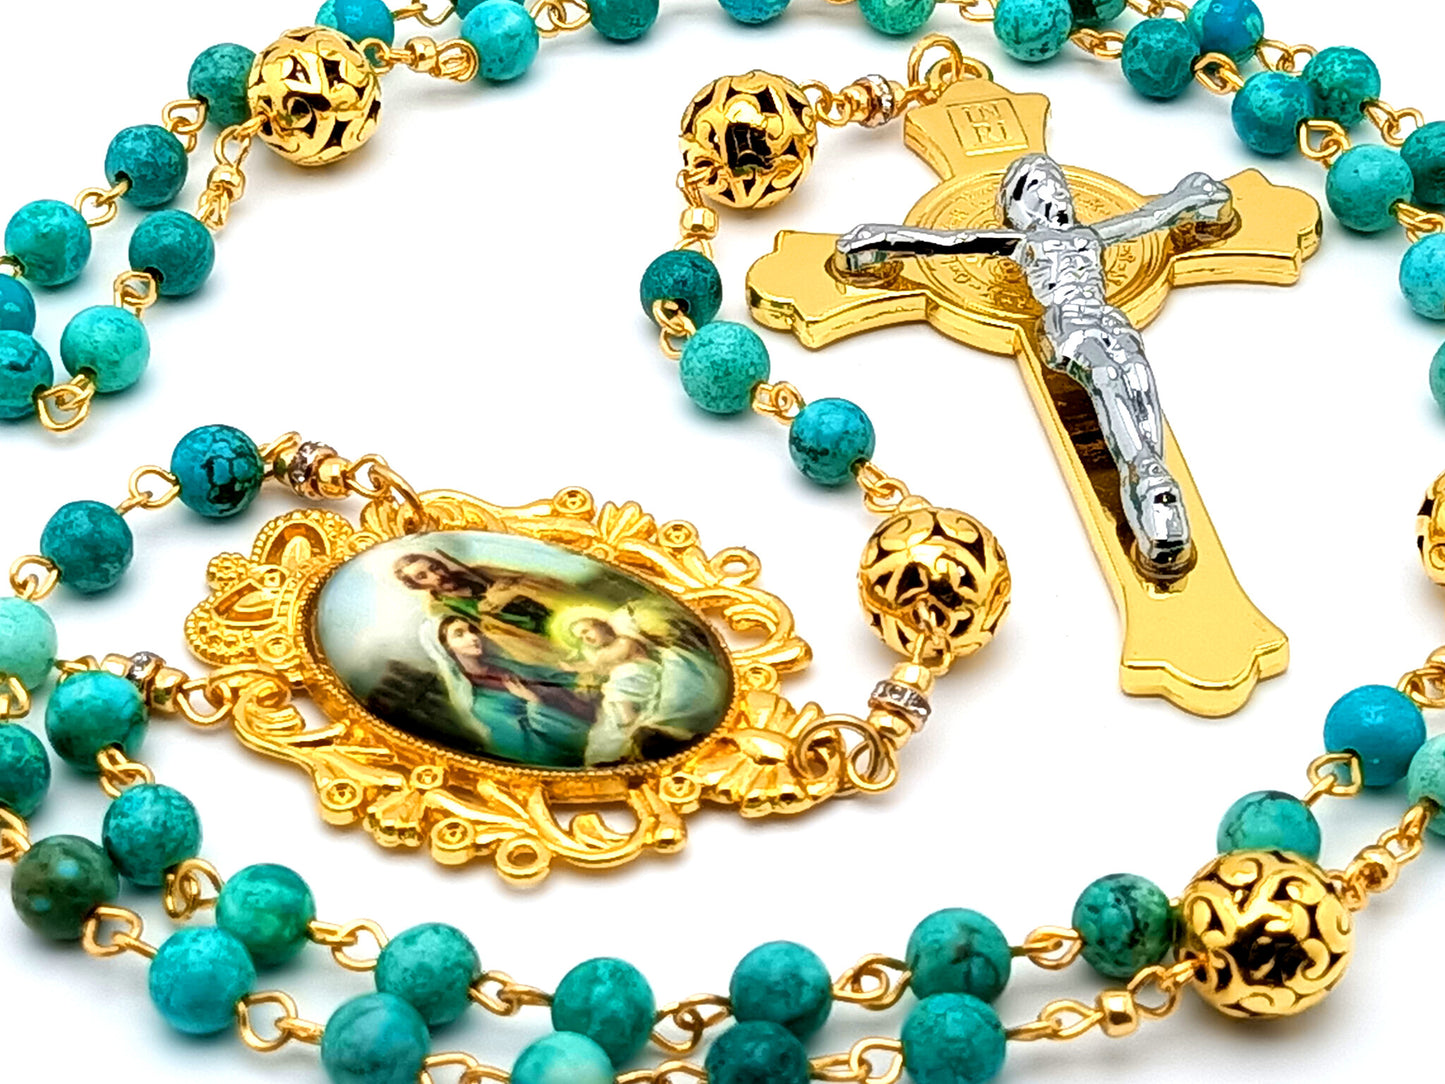 The Nativity unique rosary beads with turquoise gemstone and gold plated Bali beads and Holy Family medal and Saint Benedict gold and silver crucifix.